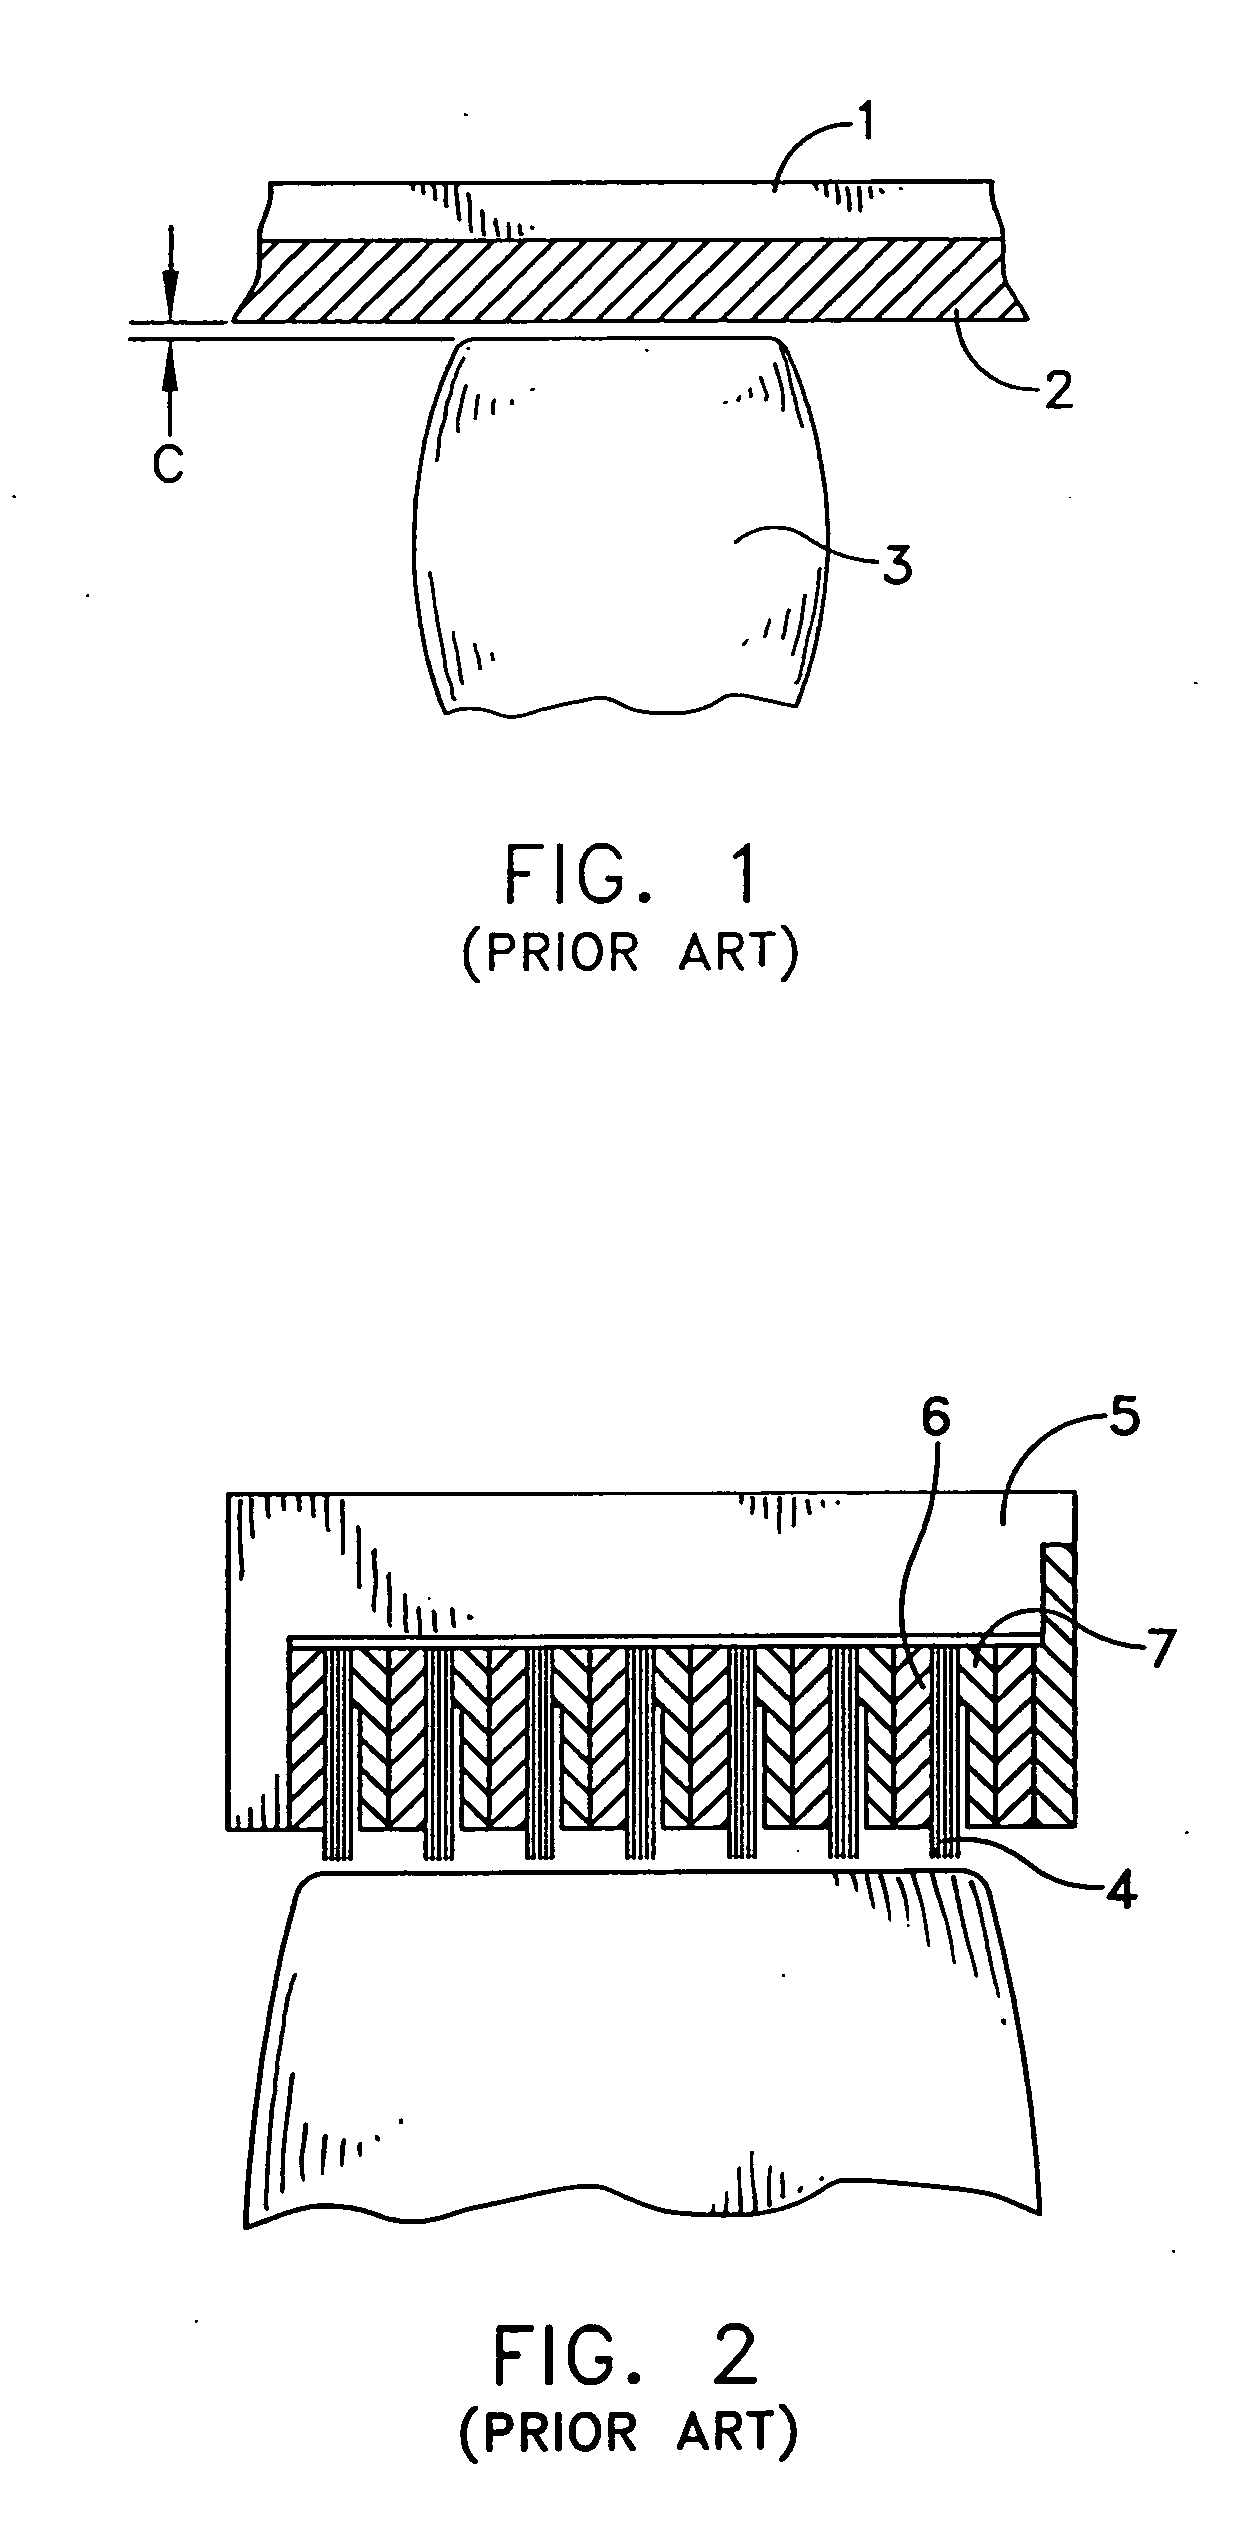 Compliant brush shroud assembly for gas turbine engine compressors